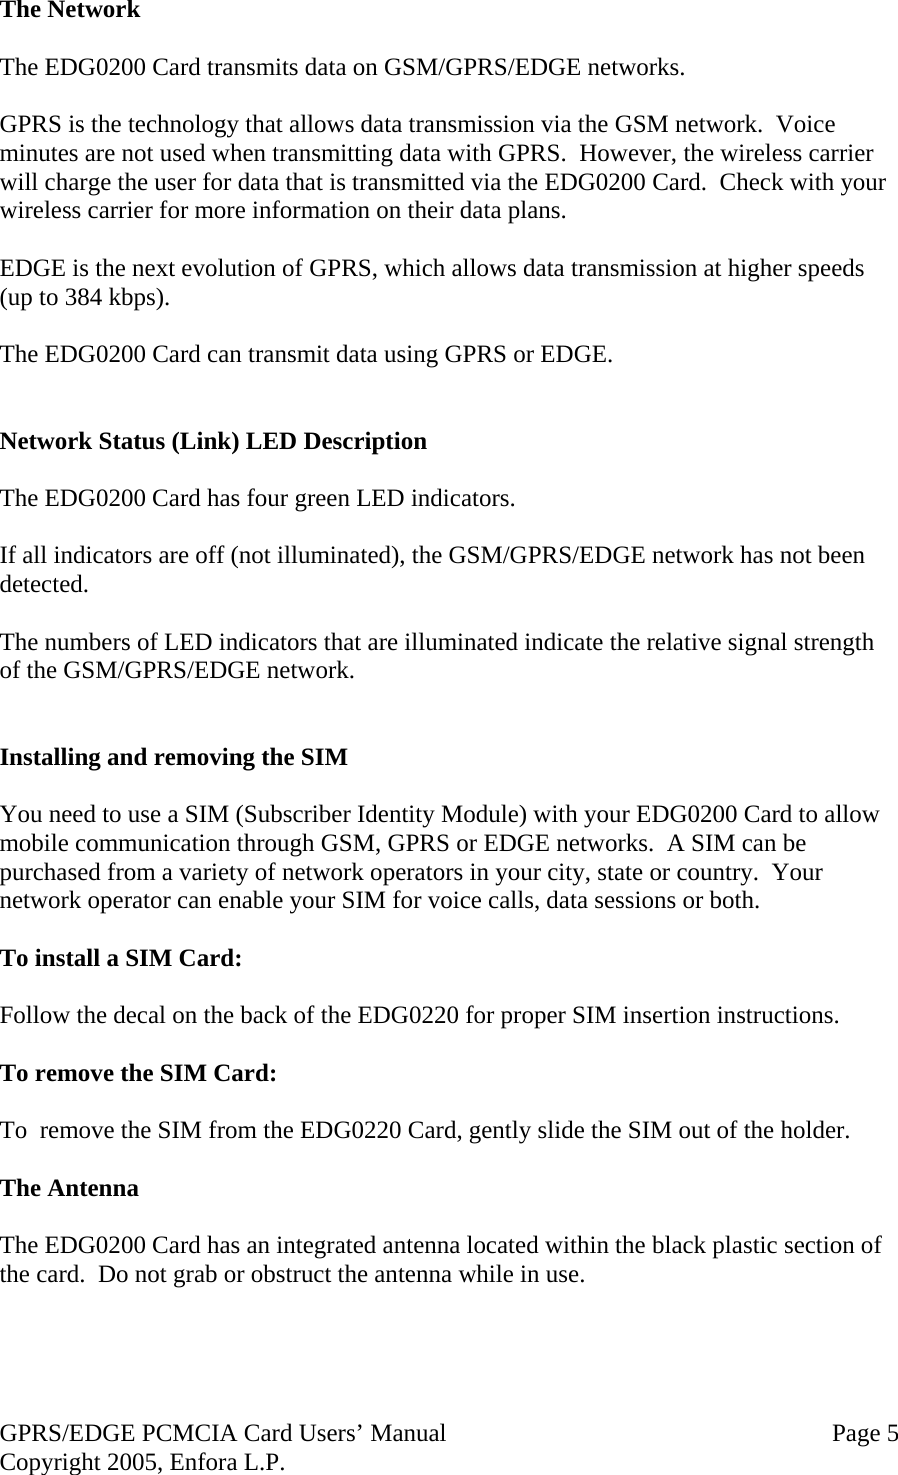 GPRS/EDGE PCMCIA Card Users’ Manual   Page 5 Copyright 2005, Enfora L.P. The Network  The EDG0200 Card transmits data on GSM/GPRS/EDGE networks.  GPRS is the technology that allows data transmission via the GSM network.  Voice minutes are not used when transmitting data with GPRS.  However, the wireless carrier will charge the user for data that is transmitted via the EDG0200 Card.  Check with your wireless carrier for more information on their data plans.  EDGE is the next evolution of GPRS, which allows data transmission at higher speeds (up to 384 kbps).  The EDG0200 Card can transmit data using GPRS or EDGE.   Network Status (Link) LED Description  The EDG0200 Card has four green LED indicators.    If all indicators are off (not illuminated), the GSM/GPRS/EDGE network has not been detected.  The numbers of LED indicators that are illuminated indicate the relative signal strength of the GSM/GPRS/EDGE network.   Installing and removing the SIM  You need to use a SIM (Subscriber Identity Module) with your EDG0200 Card to allow mobile communication through GSM, GPRS or EDGE networks.  A SIM can be purchased from a variety of network operators in your city, state or country.  Your network operator can enable your SIM for voice calls, data sessions or both.  To install a SIM Card:  Follow the decal on the back of the EDG0220 for proper SIM insertion instructions.  To remove the SIM Card:  To  remove the SIM from the EDG0220 Card, gently slide the SIM out of the holder.  The Antenna  The EDG0200 Card has an integrated antenna located within the black plastic section of the card.  Do not grab or obstruct the antenna while in use.  